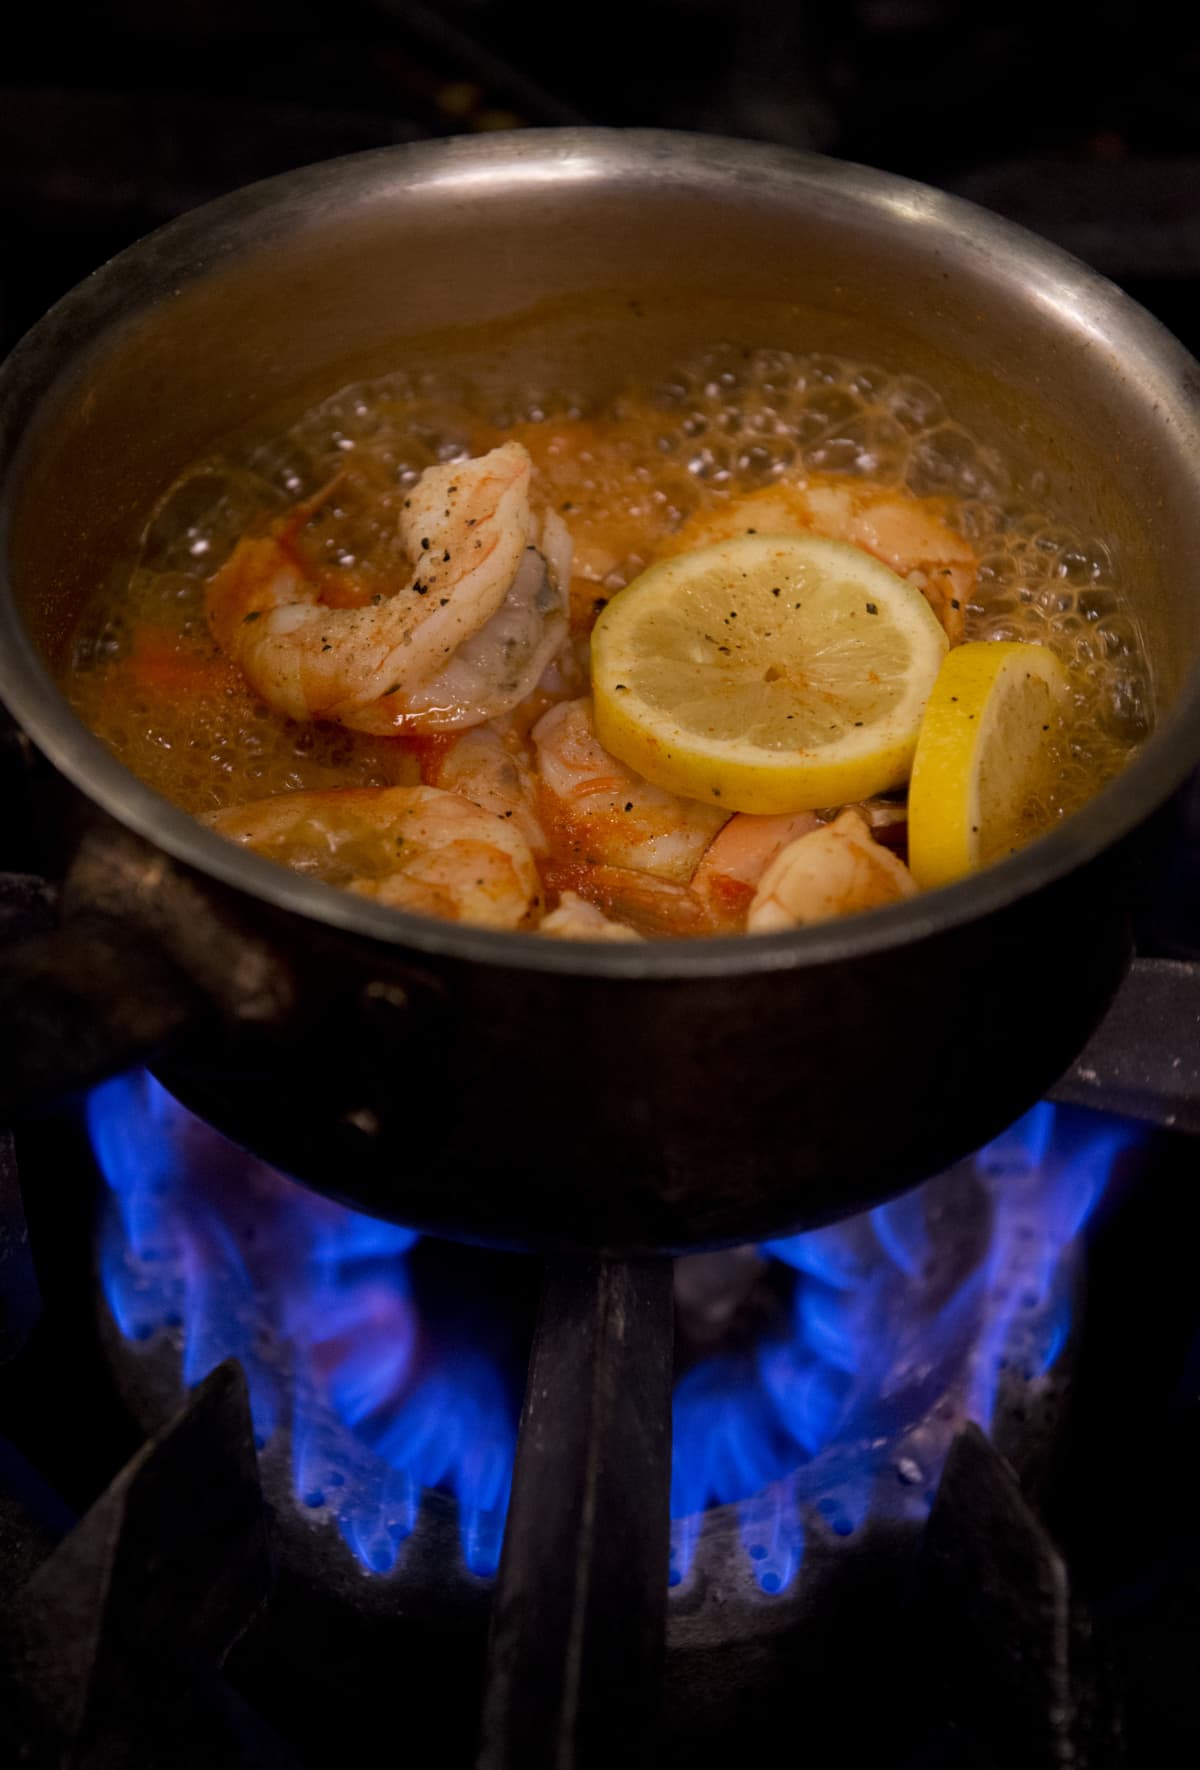 UNITED STATES - JUNE 13: Shrimp and lemons boil on a stove in the kitchen of Farmers Fishers Bakers restaurant on the Georgetown waterfront. (Photo By Tom Williams/CQ Roll Call)